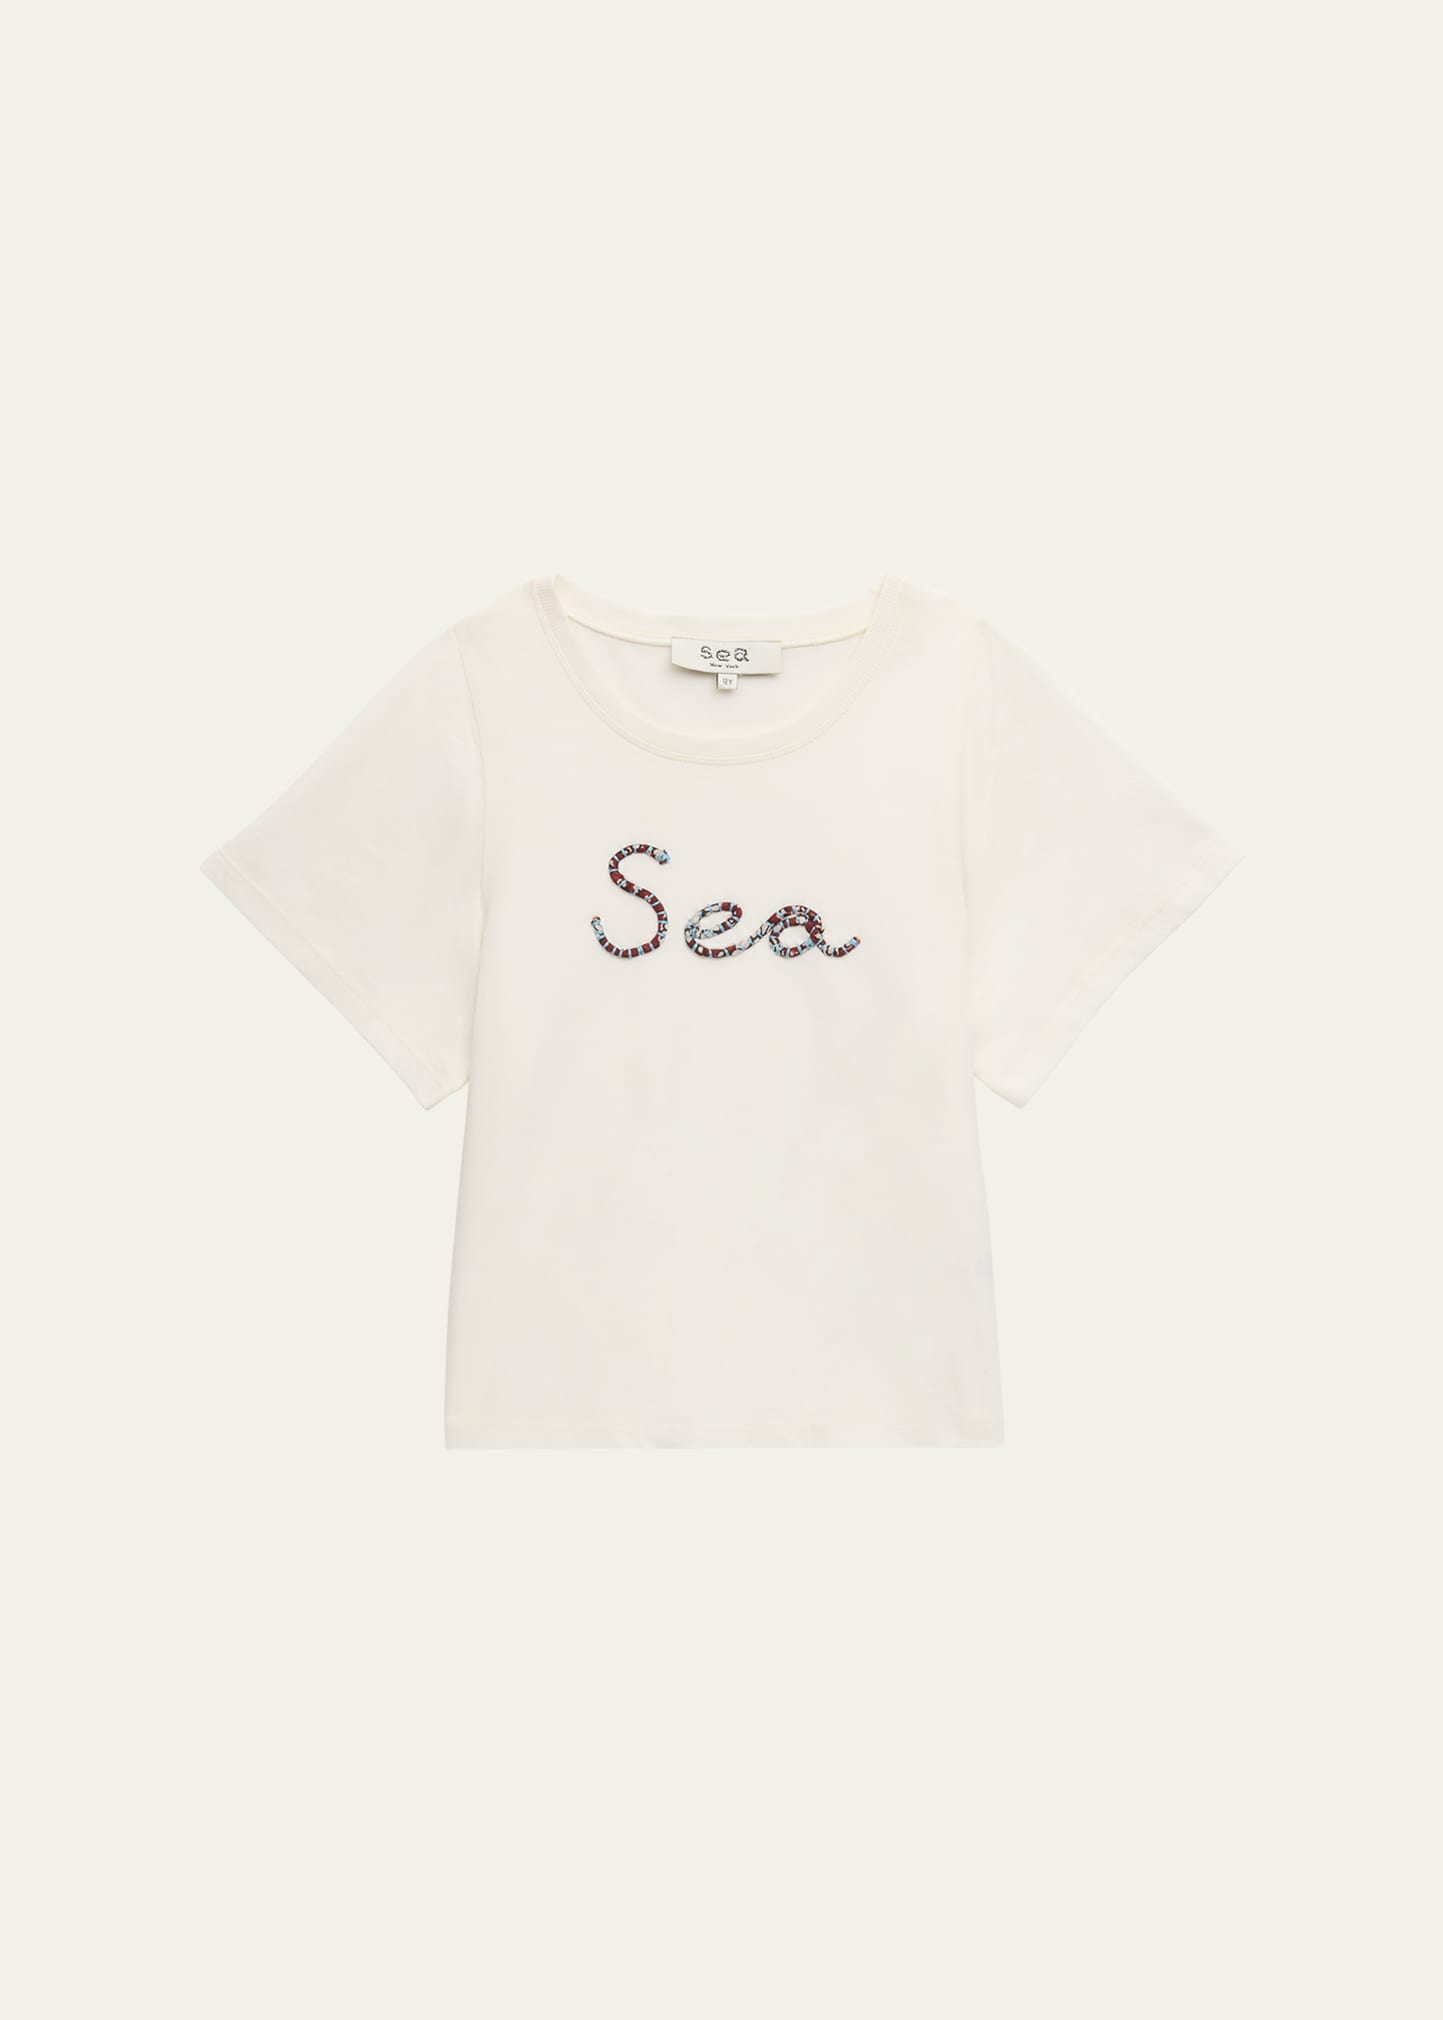 Sea Kids' Girl's  Embroidery Short-sleeve T-shirt In White